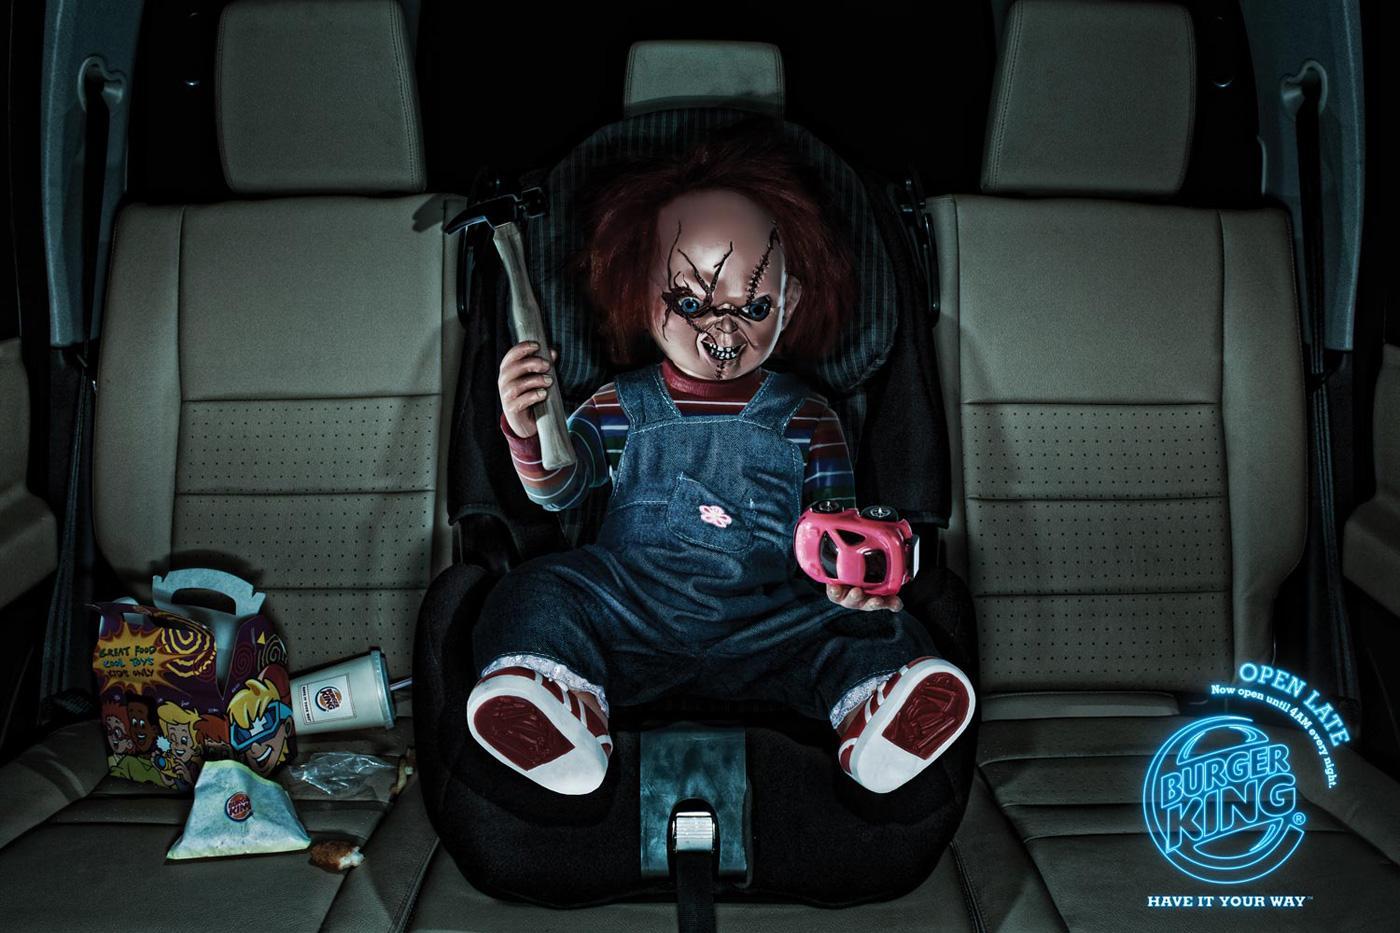 Burger King Print Advert By Tonic: Chucky. Ads of the World™